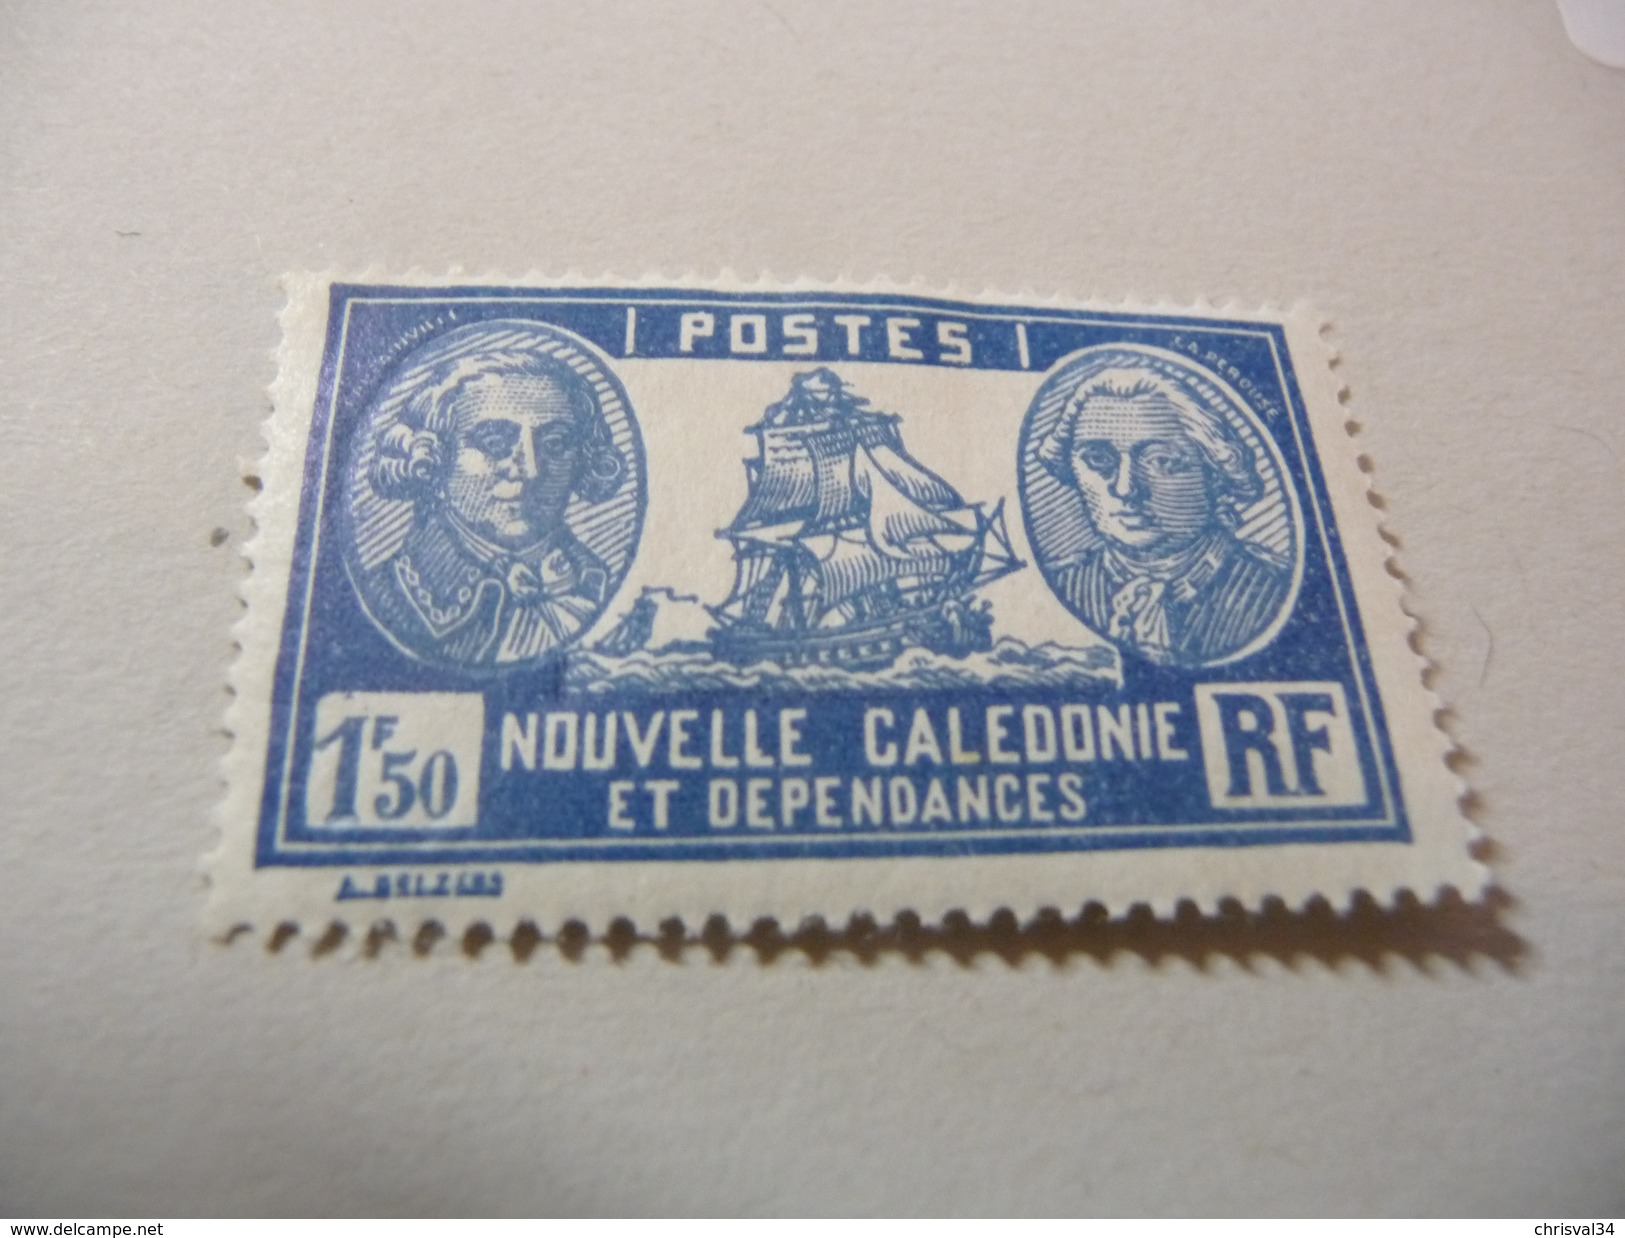 TIMBRE  NOUVELLE-CALEDONIE     N  156   COTE   1,00  EUROS    NEUF  TRACE  CHARNIERE - Unused Stamps